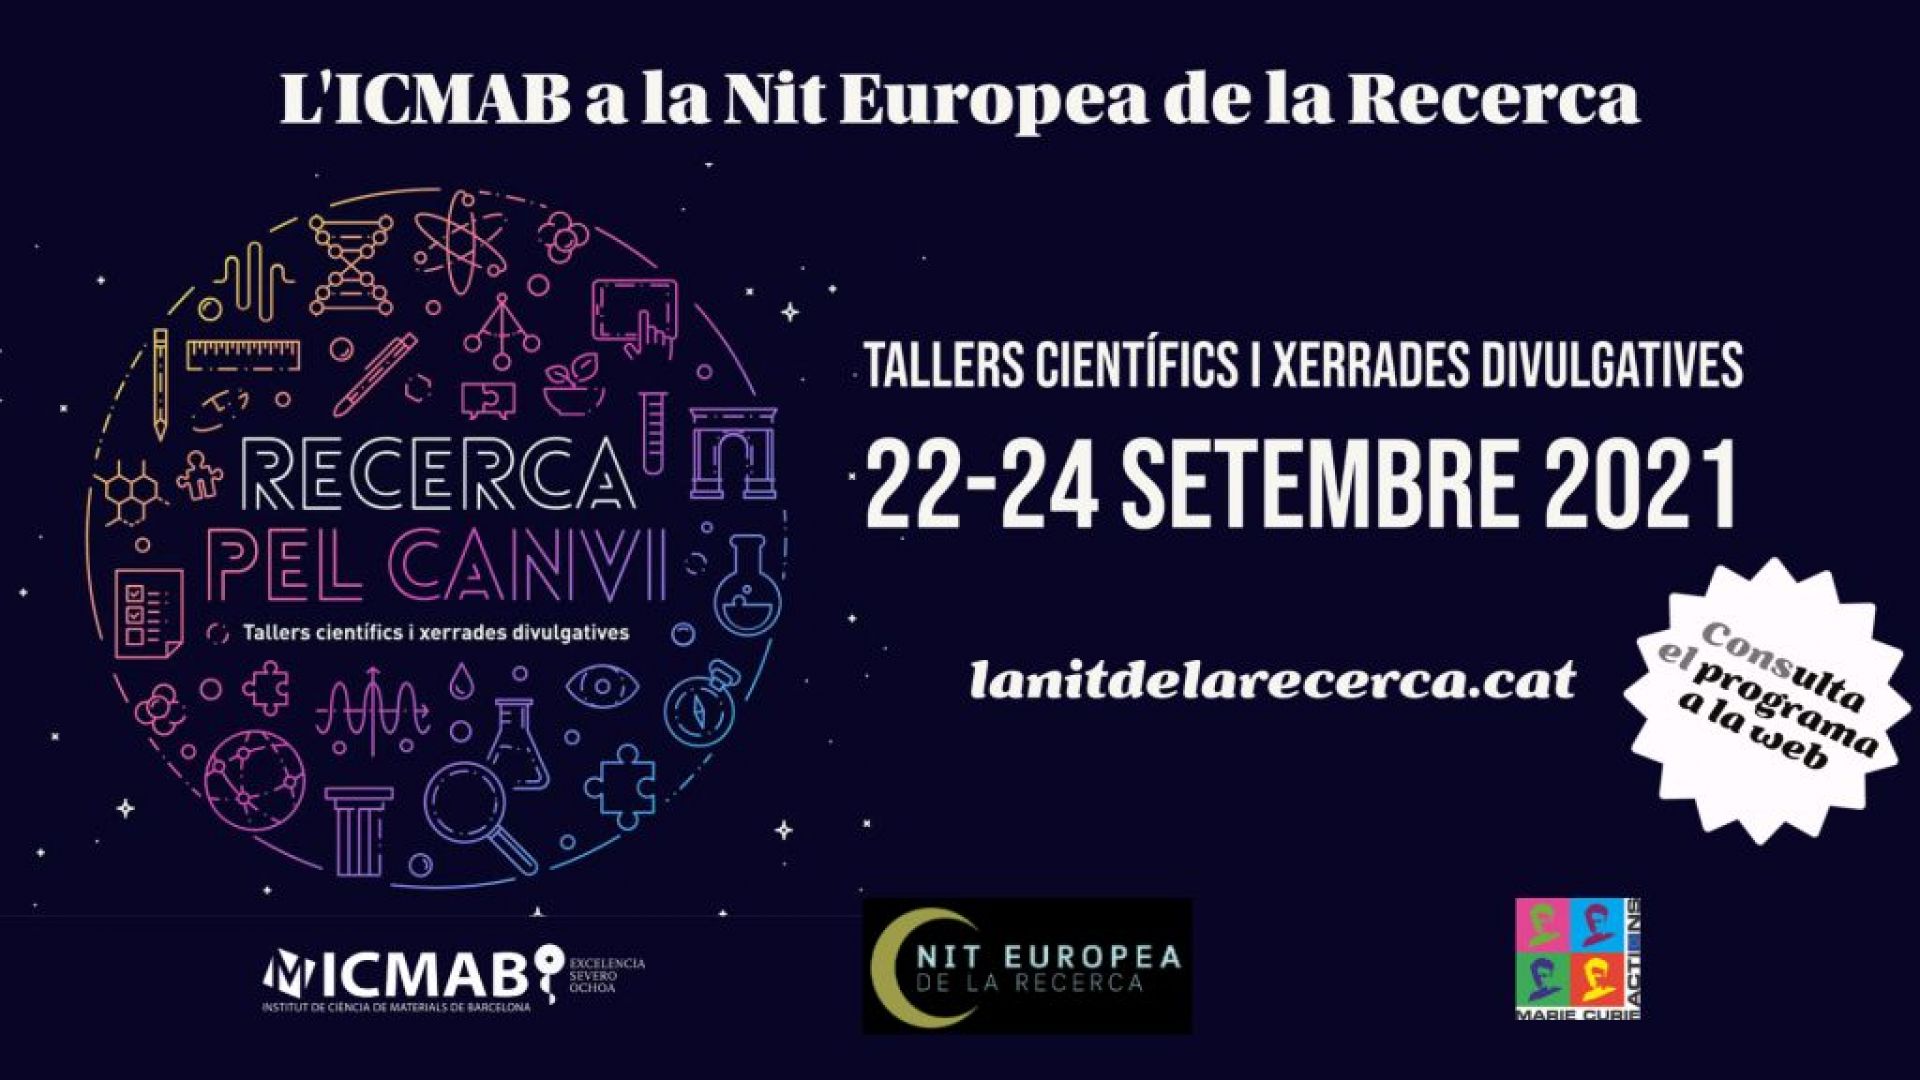 The European Researcher’s Night is back – and with presential activities!